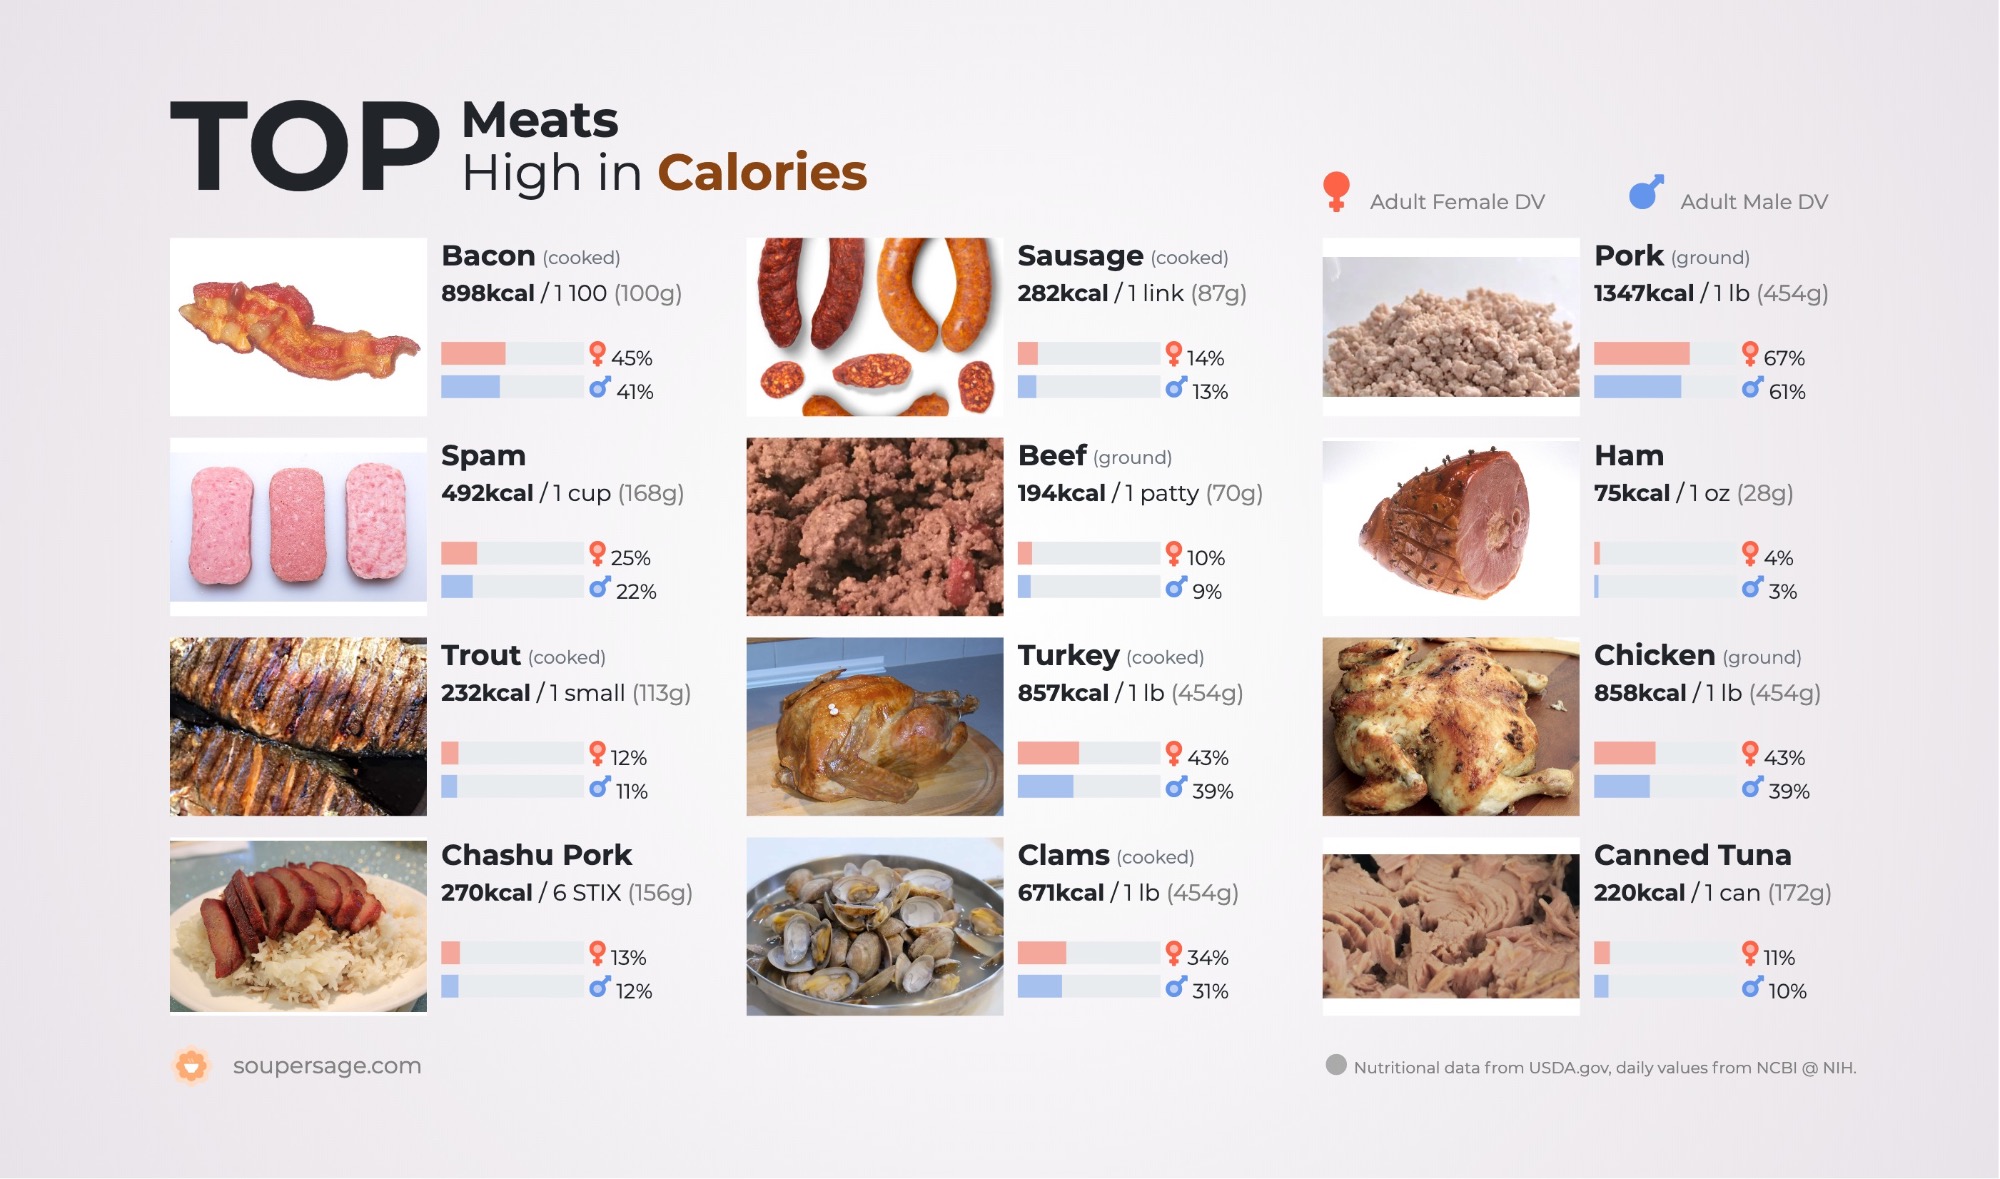 image of Top Meats High in Calories